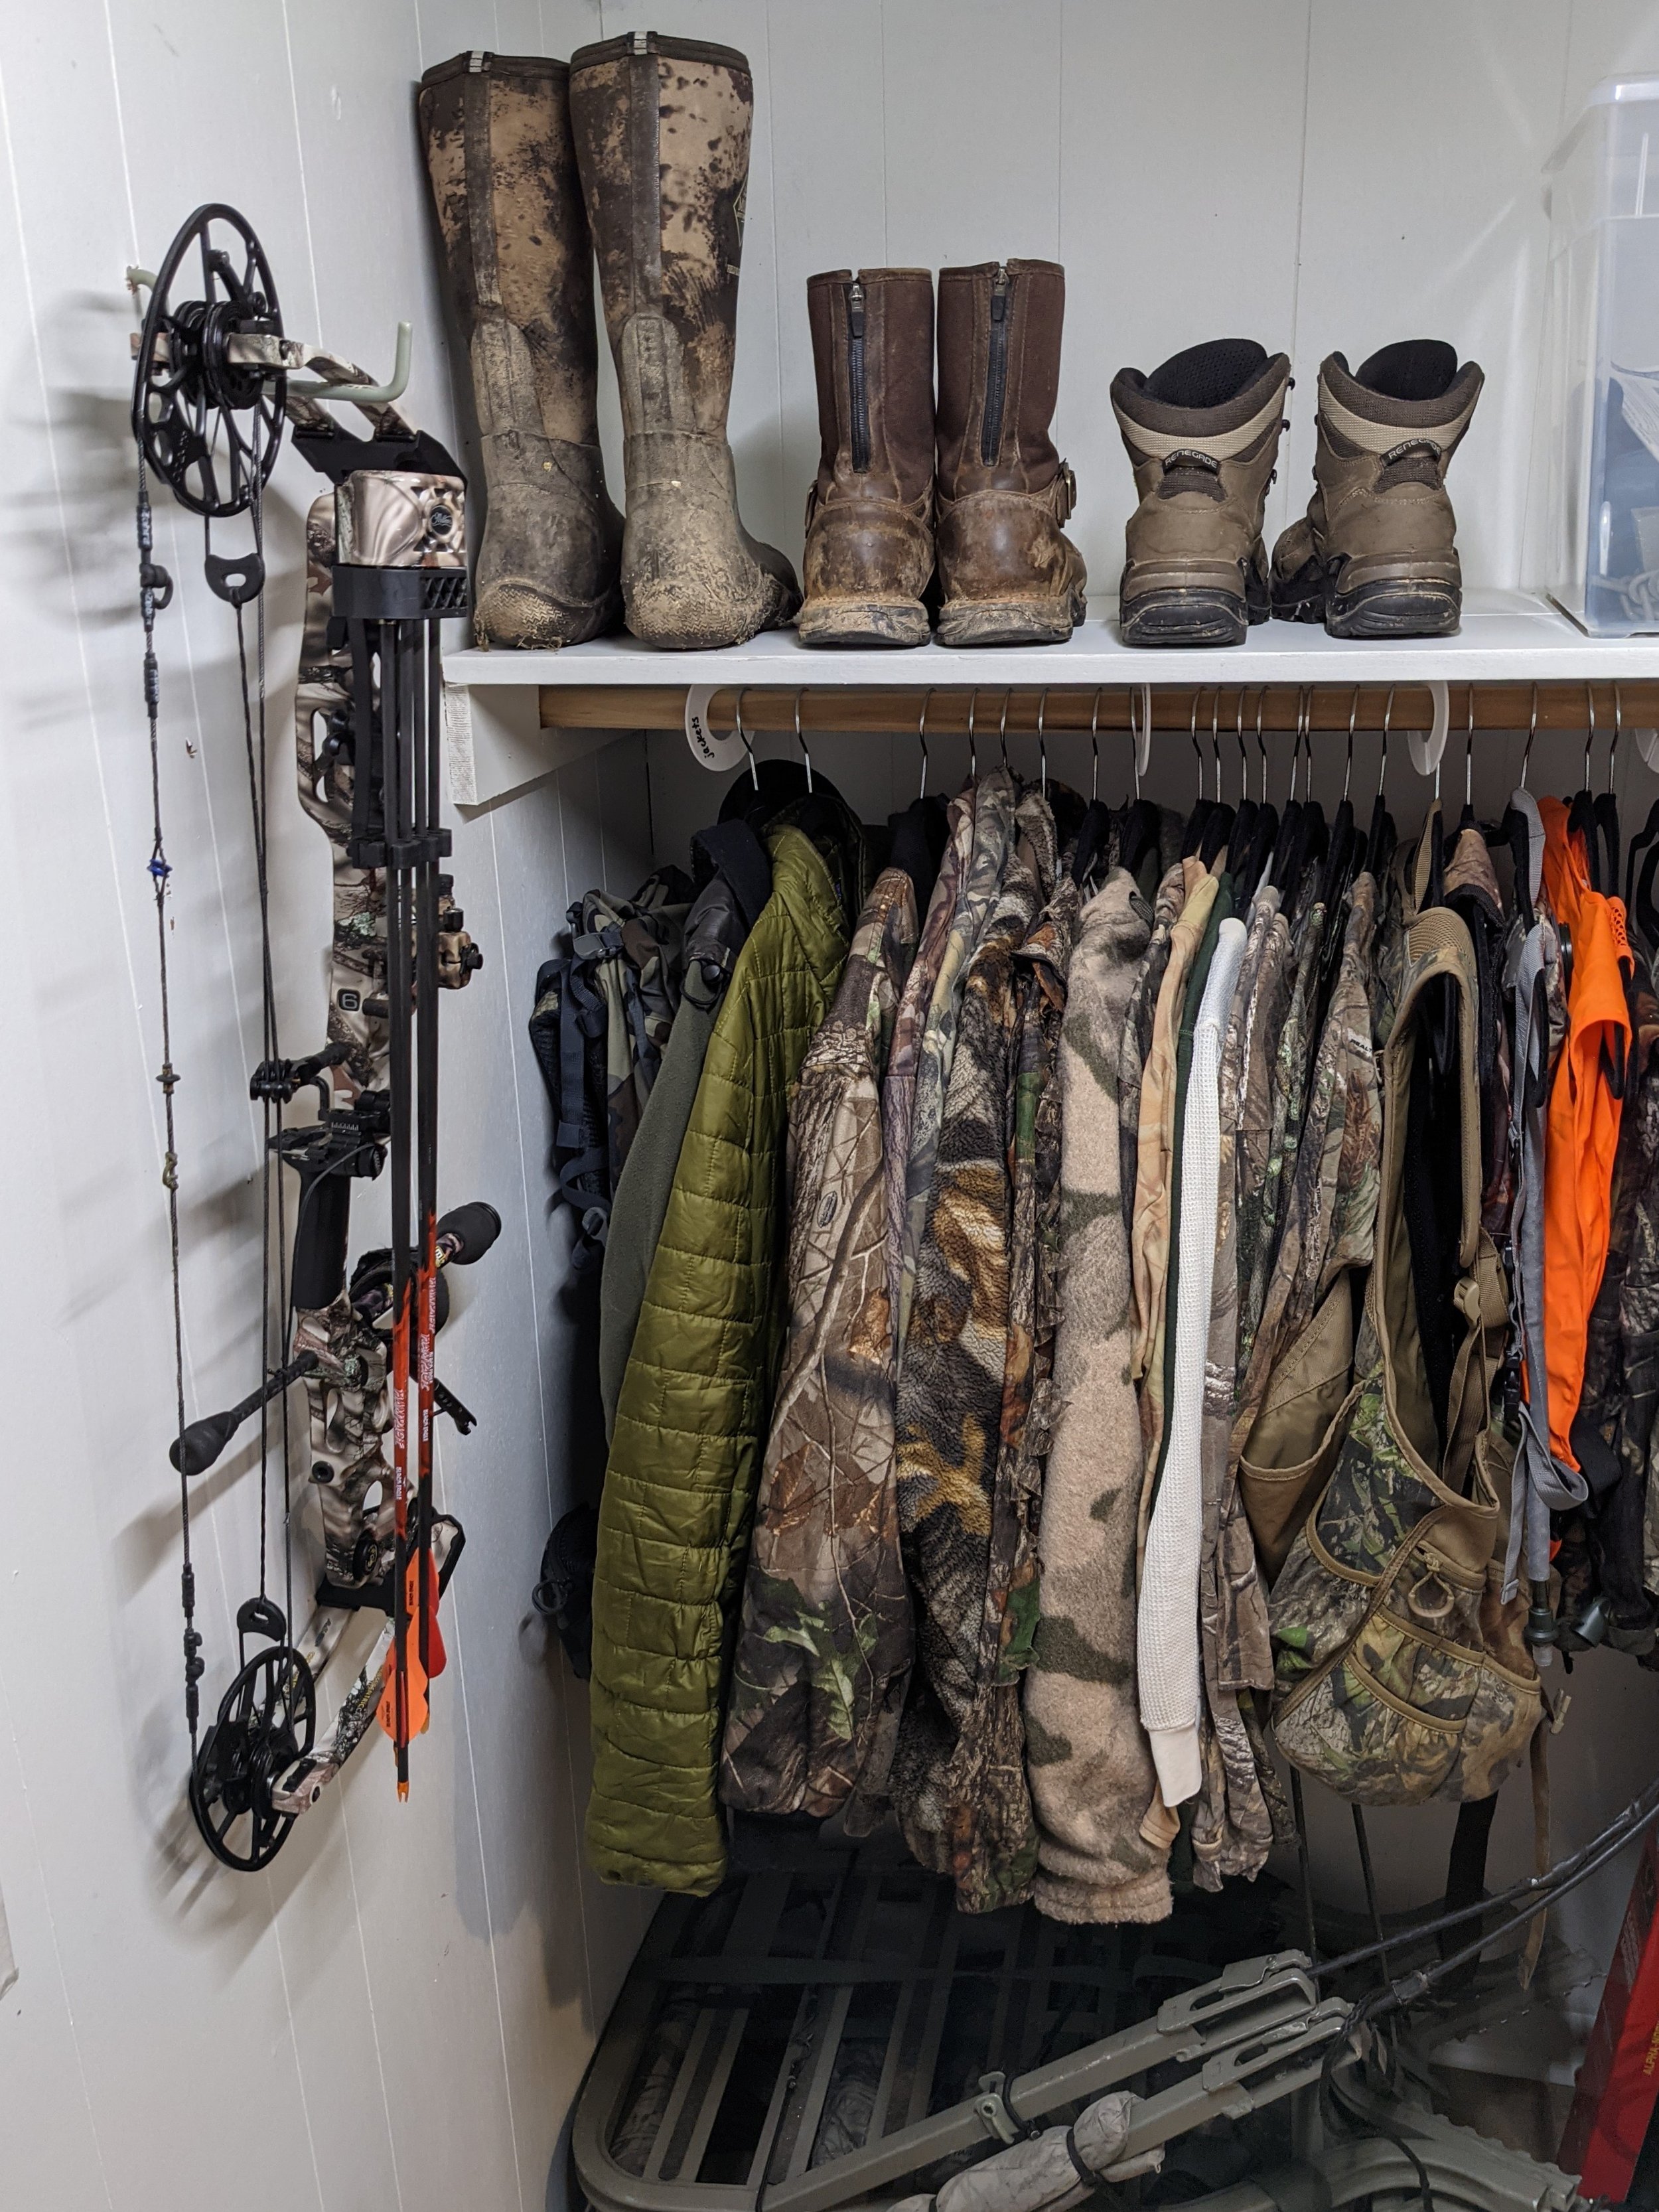 40 Man Stuff For Styling and Personalizing  Rustic closet, Hunting room,  Storage room organization